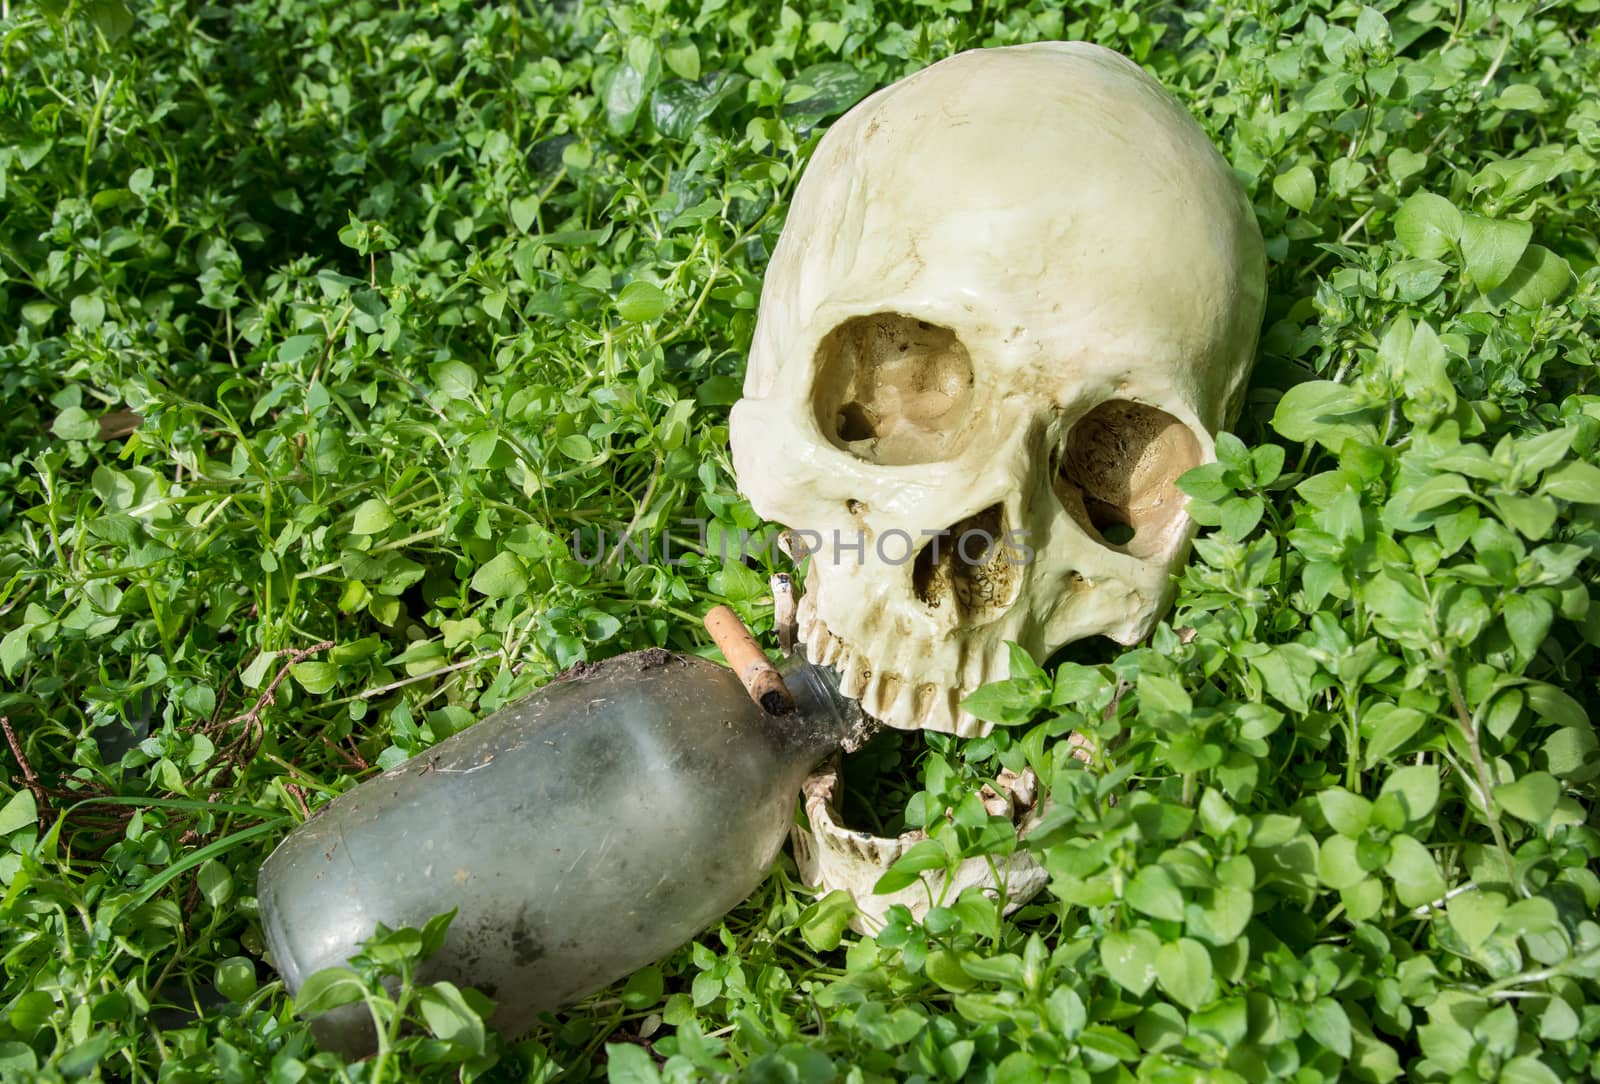 the scarry skull in the garden with old bottle and cigarette